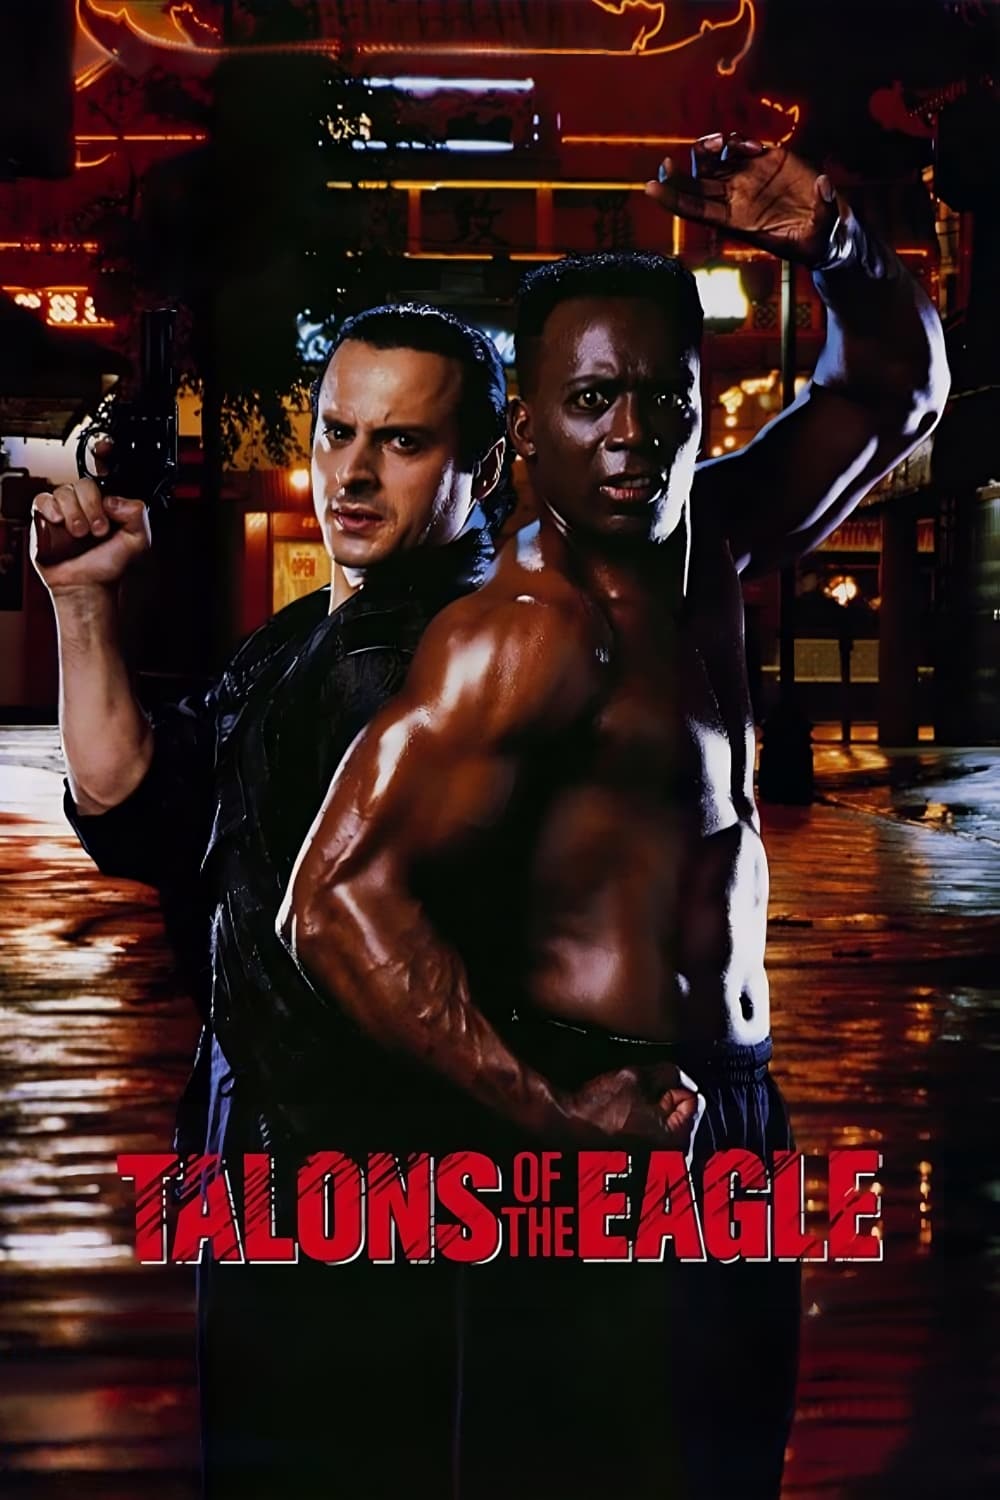 Talons of the Eagle film